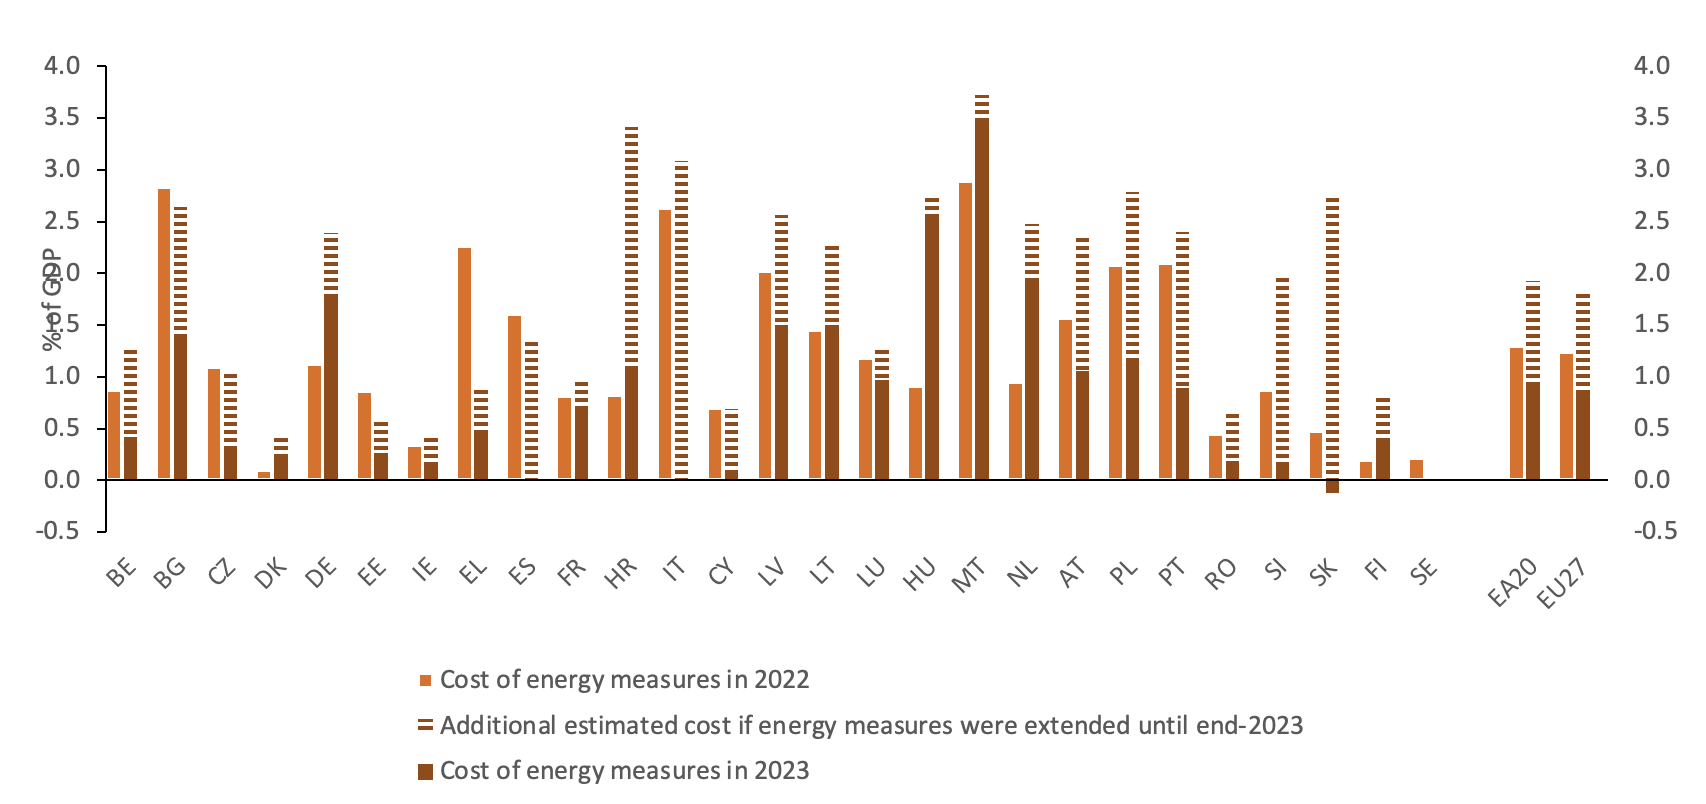 Figure 2 Estimated cost of energy measures across Member States and stylised additional costs for 2023